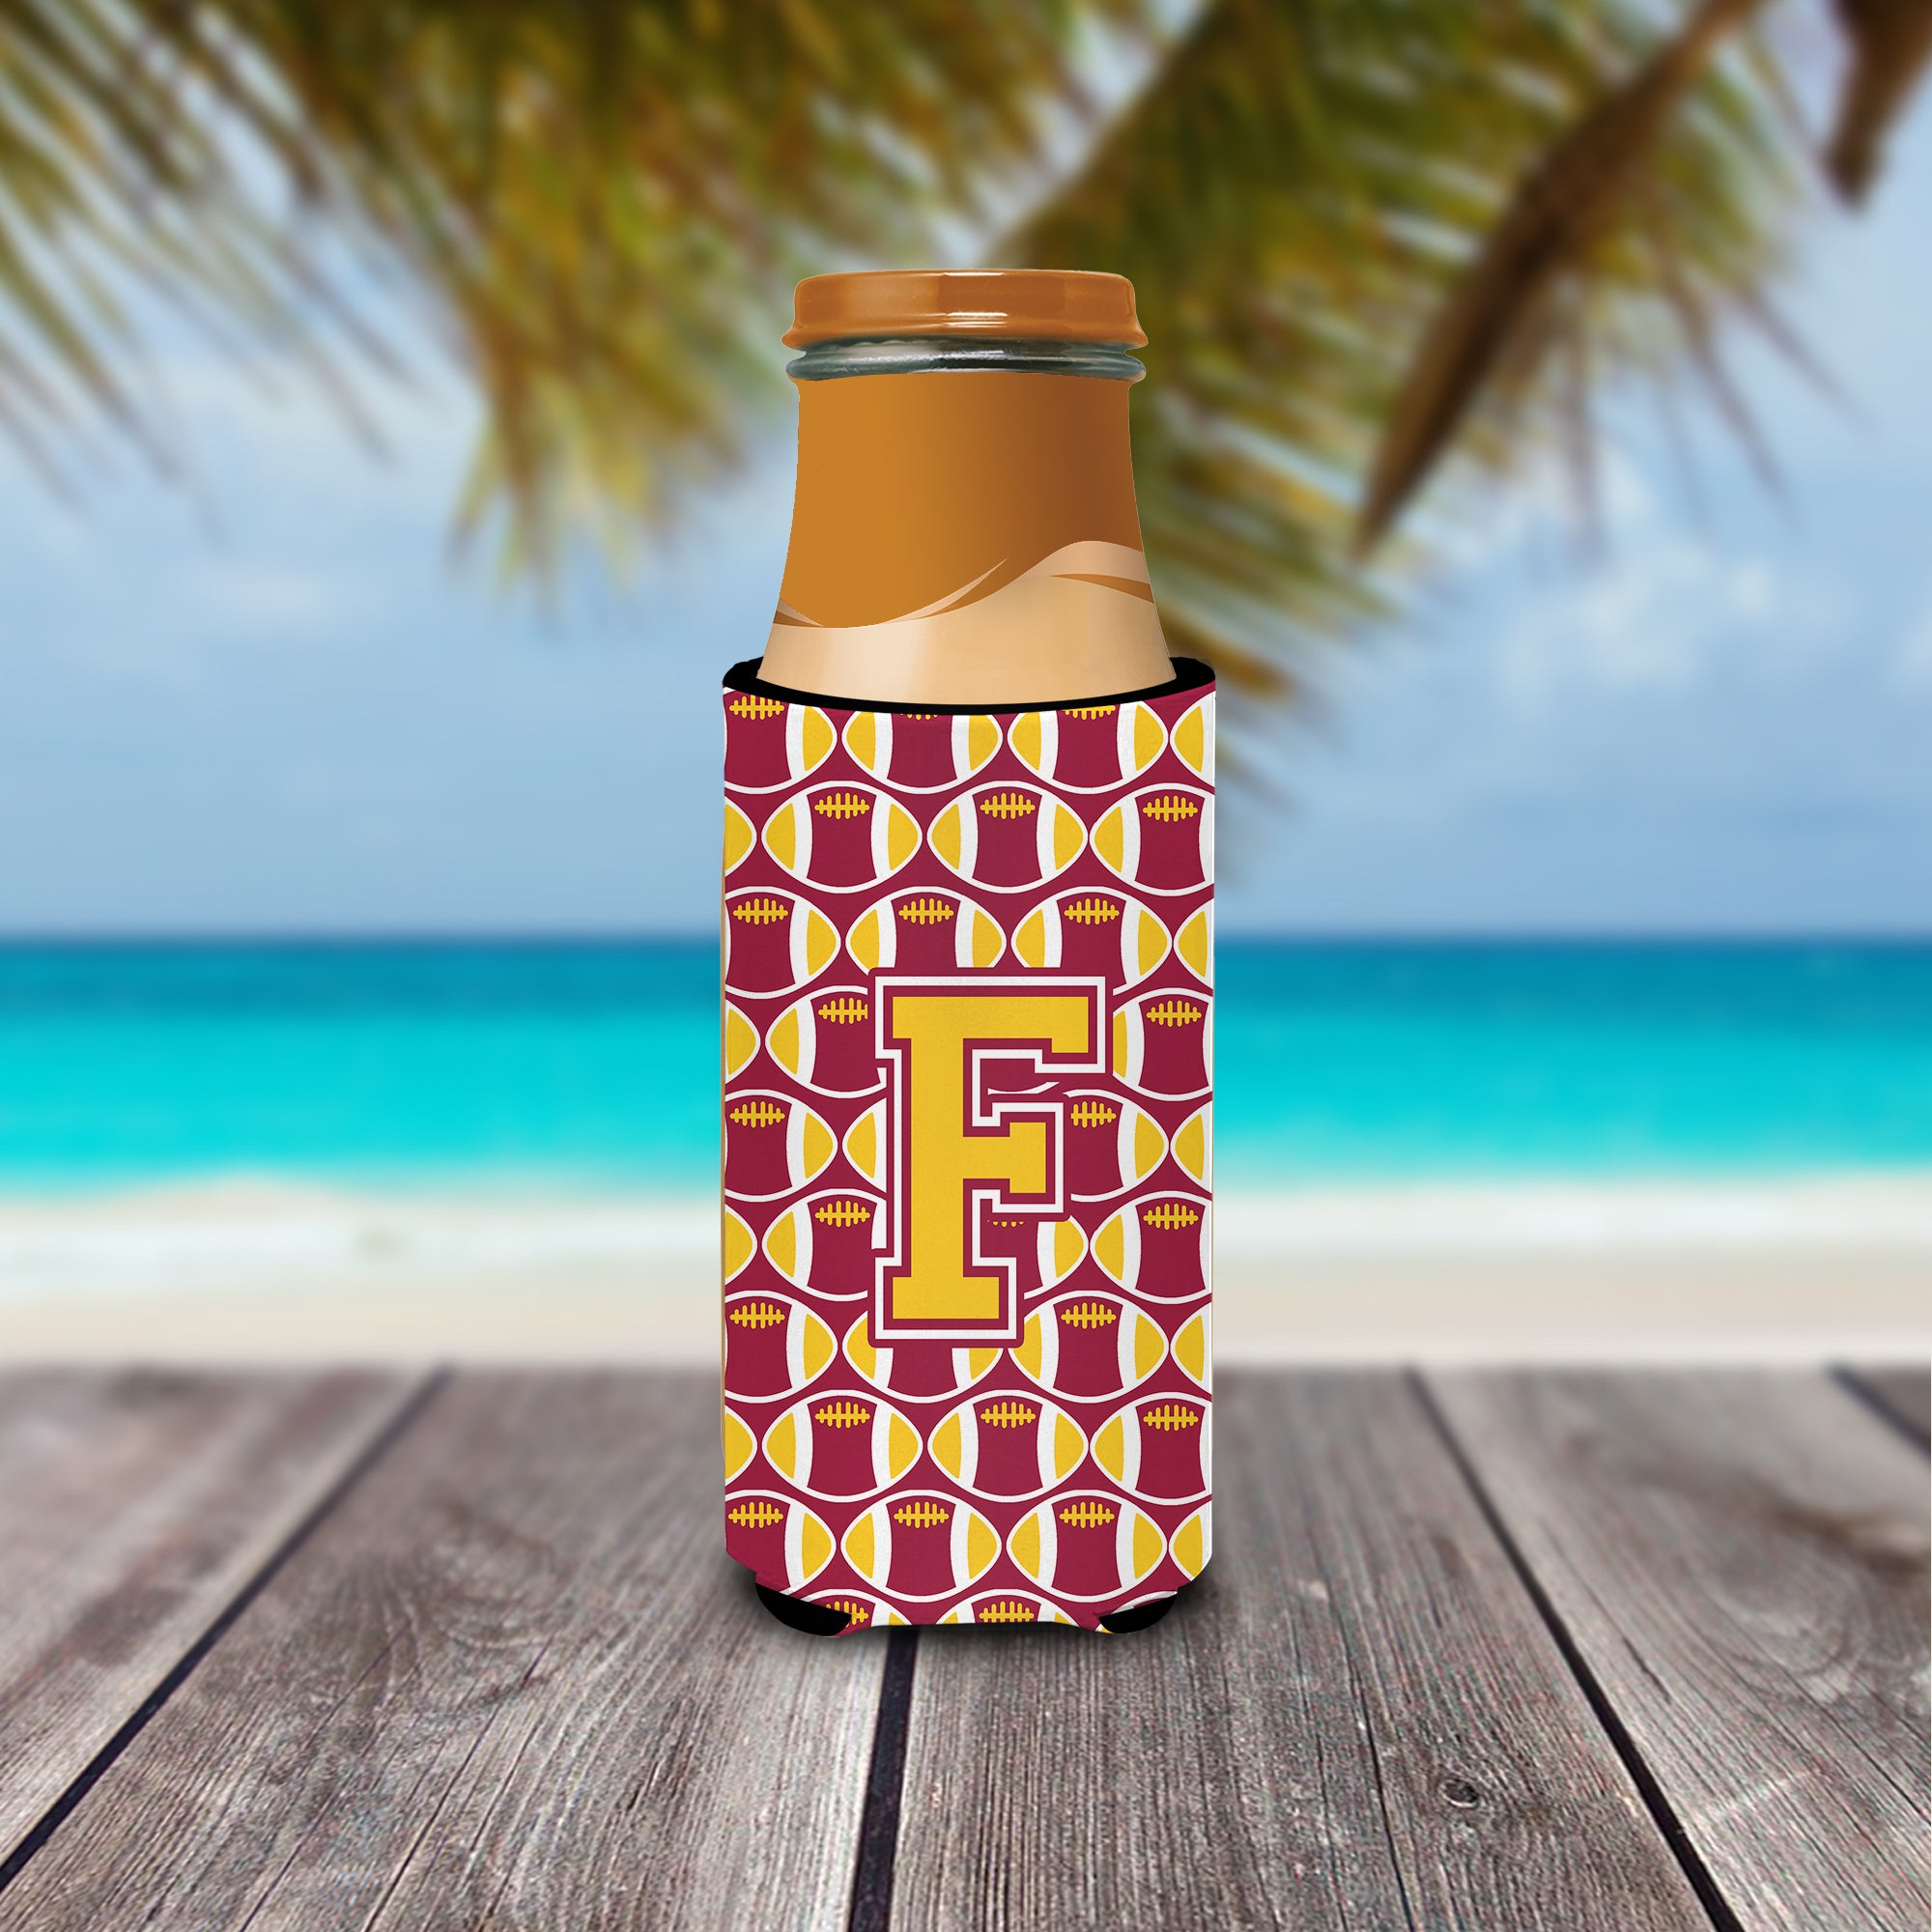 Letter F Football Maroon and Gold Ultra Beverage Insulators for slim cans CJ1081-FMUK